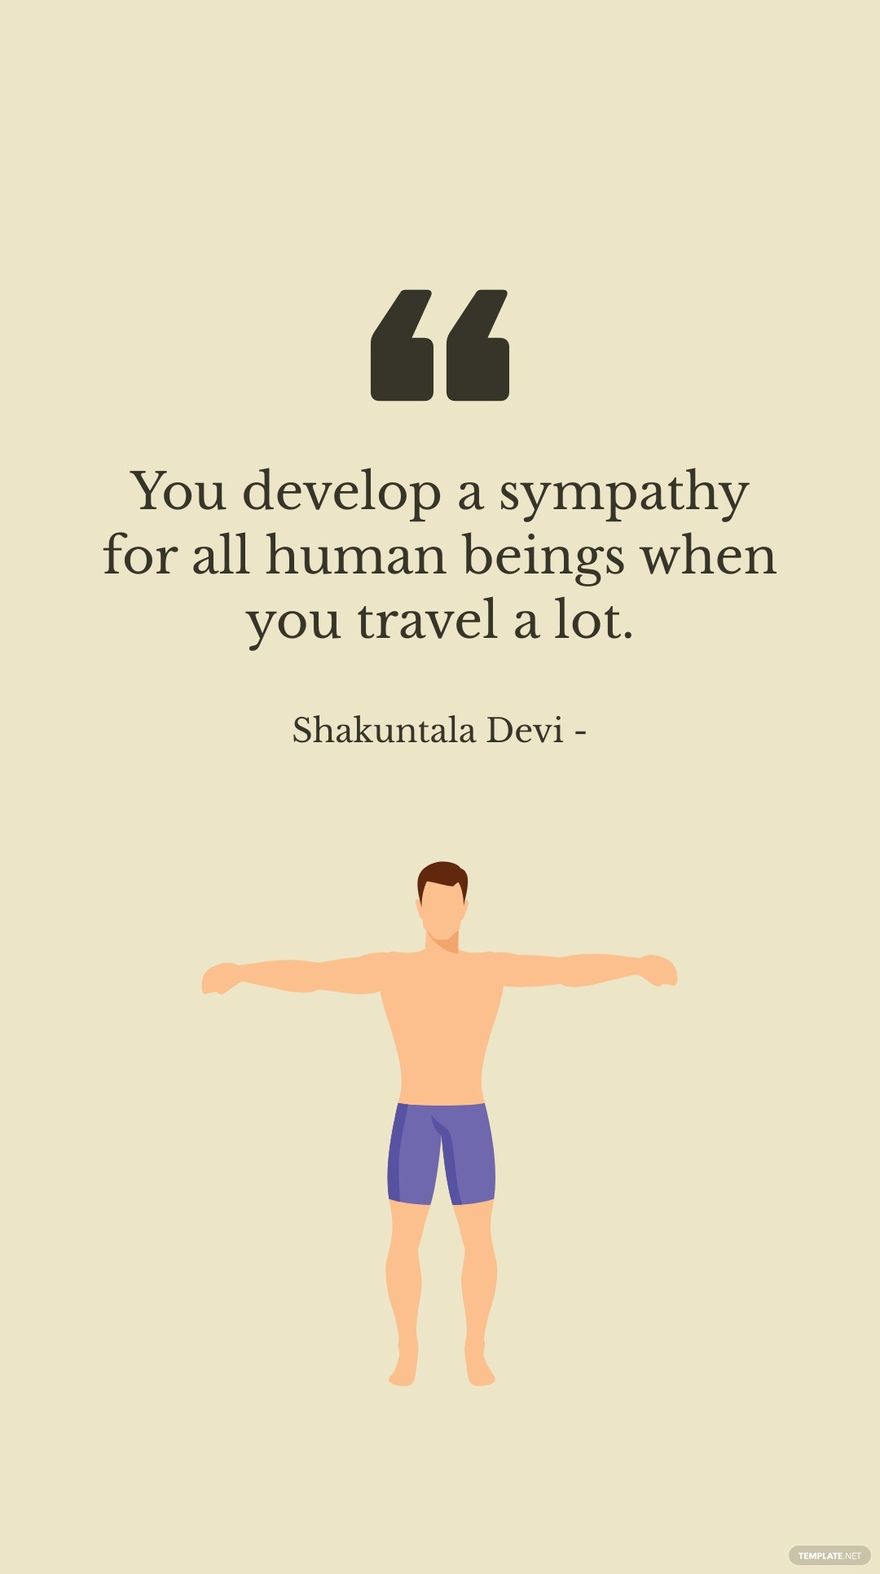 Shakuntala Devi - You develop a sympathy for all human beings when you travel a lot.